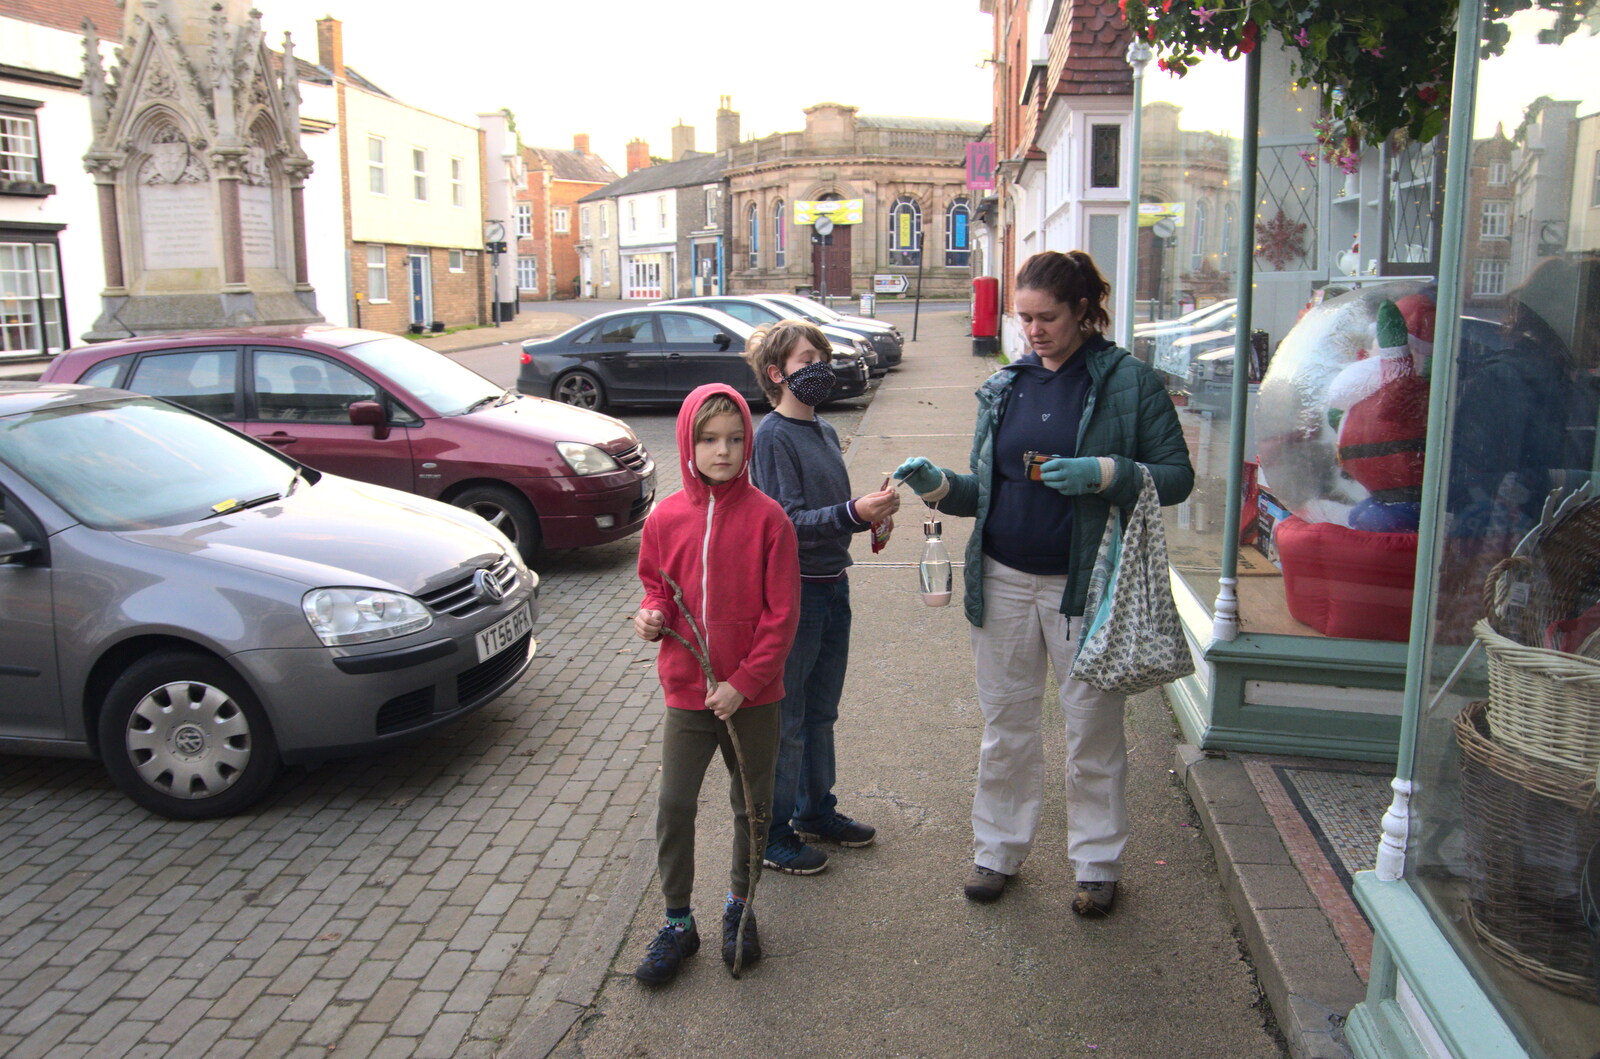 Milling around outside the Handyman from The Dereliction of Eye, Suffolk - 22nd November 2020